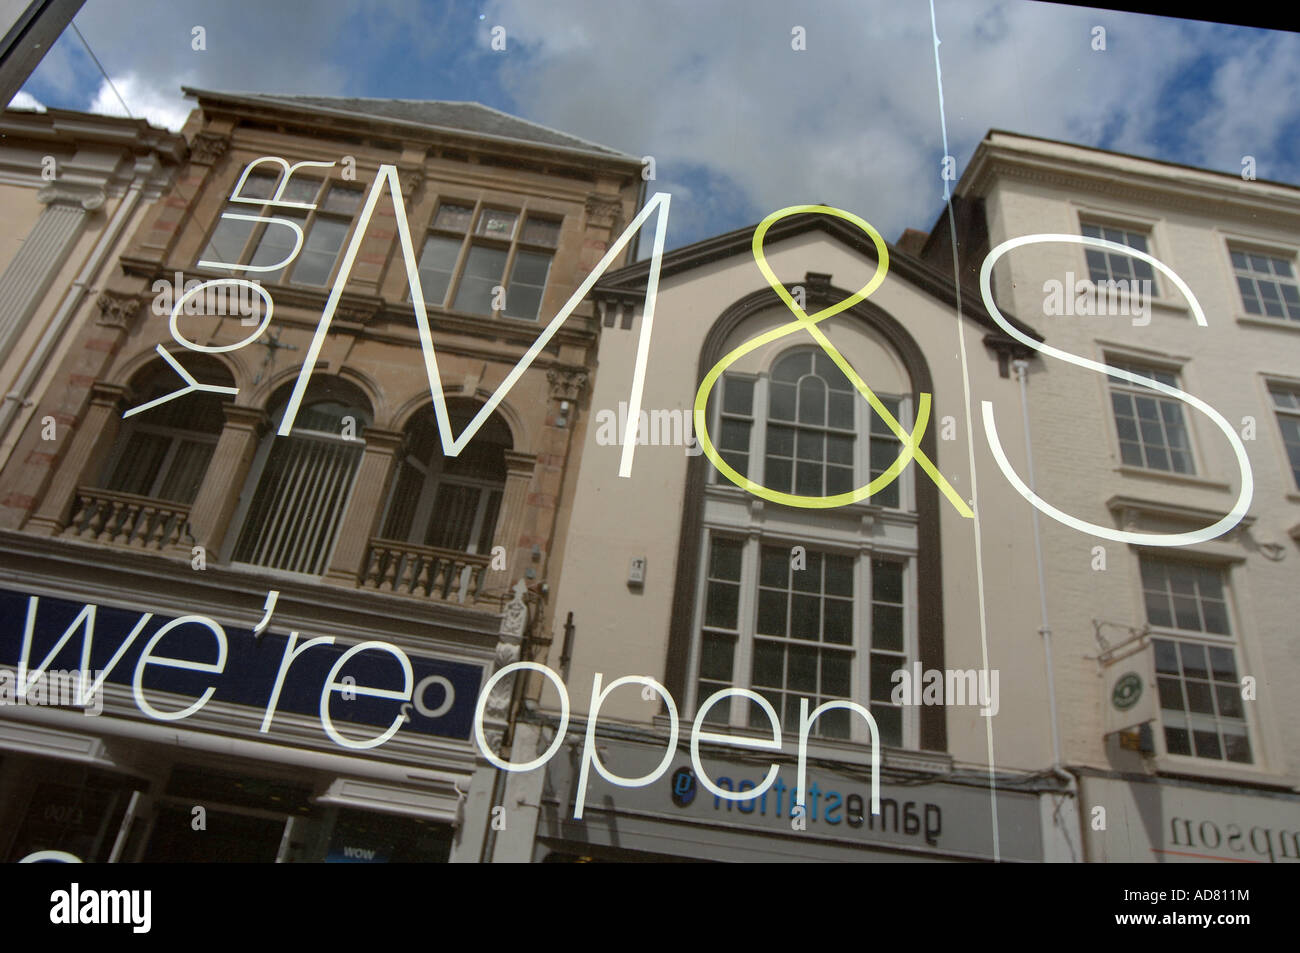 A Marks & Spencer sign on a window in Barnstaple, North Devon, with buildings reflected in the glass Stock Photo